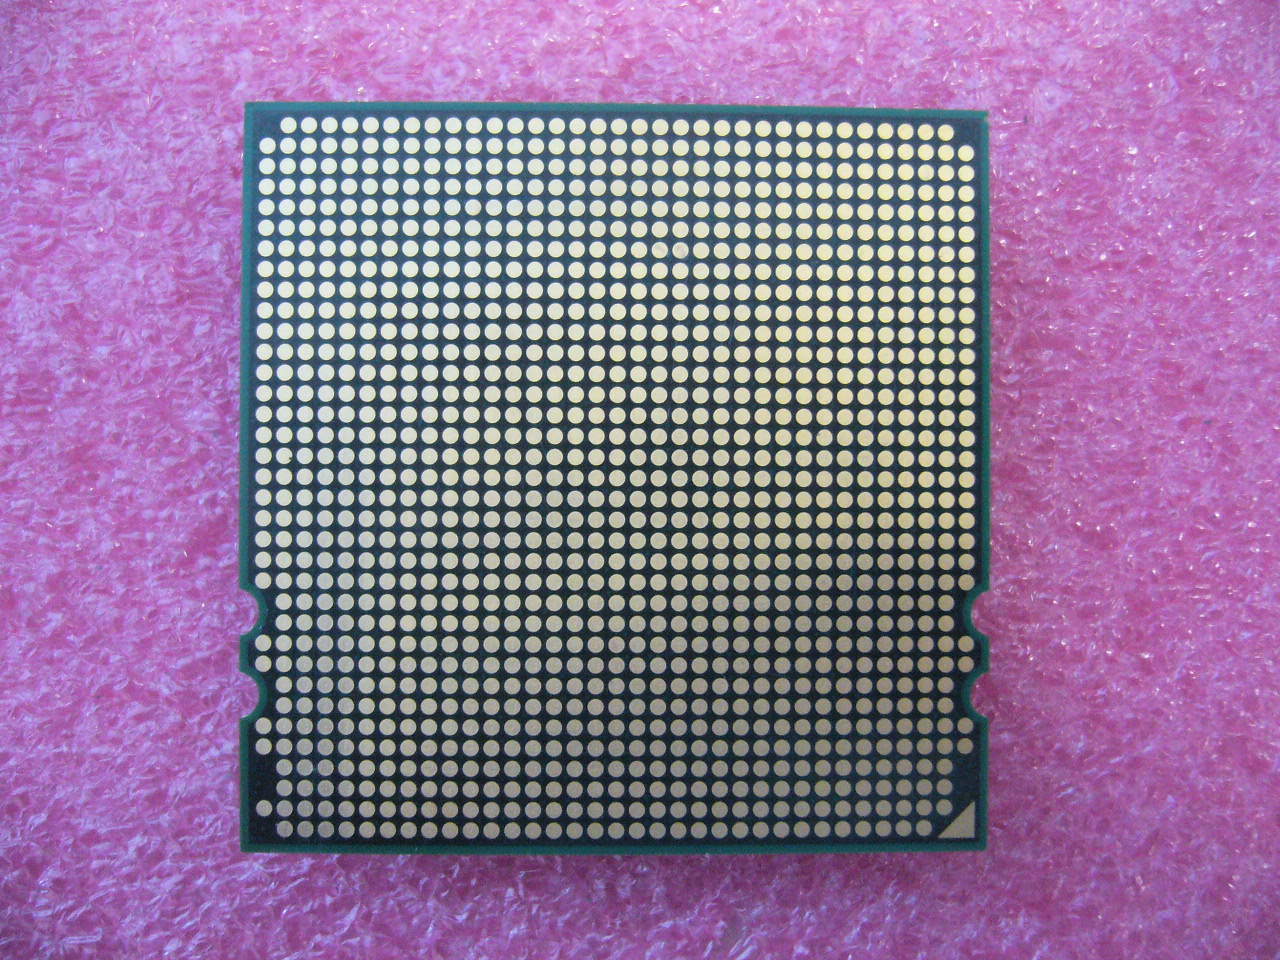 QTY 1x AMD Opteron 8439 SE 2.8 GHz Six Core (OS8439YDS6DGN) CPU Socket F 1207 - Click Image to Close